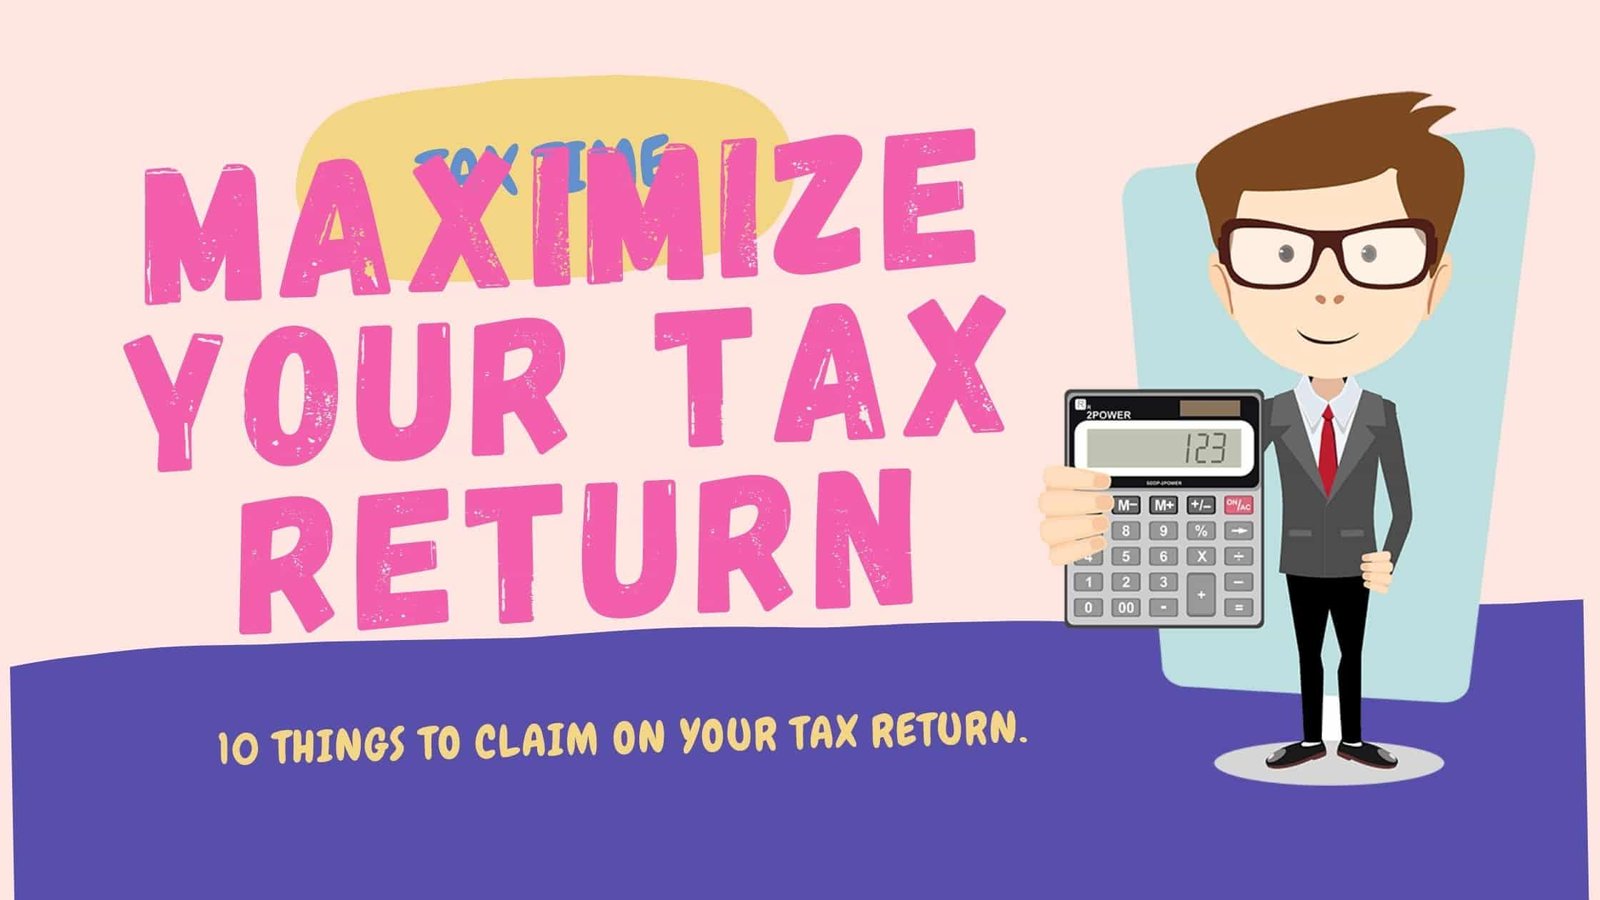 Maximize your tax return 10 things to claim in tax return Nepsyders